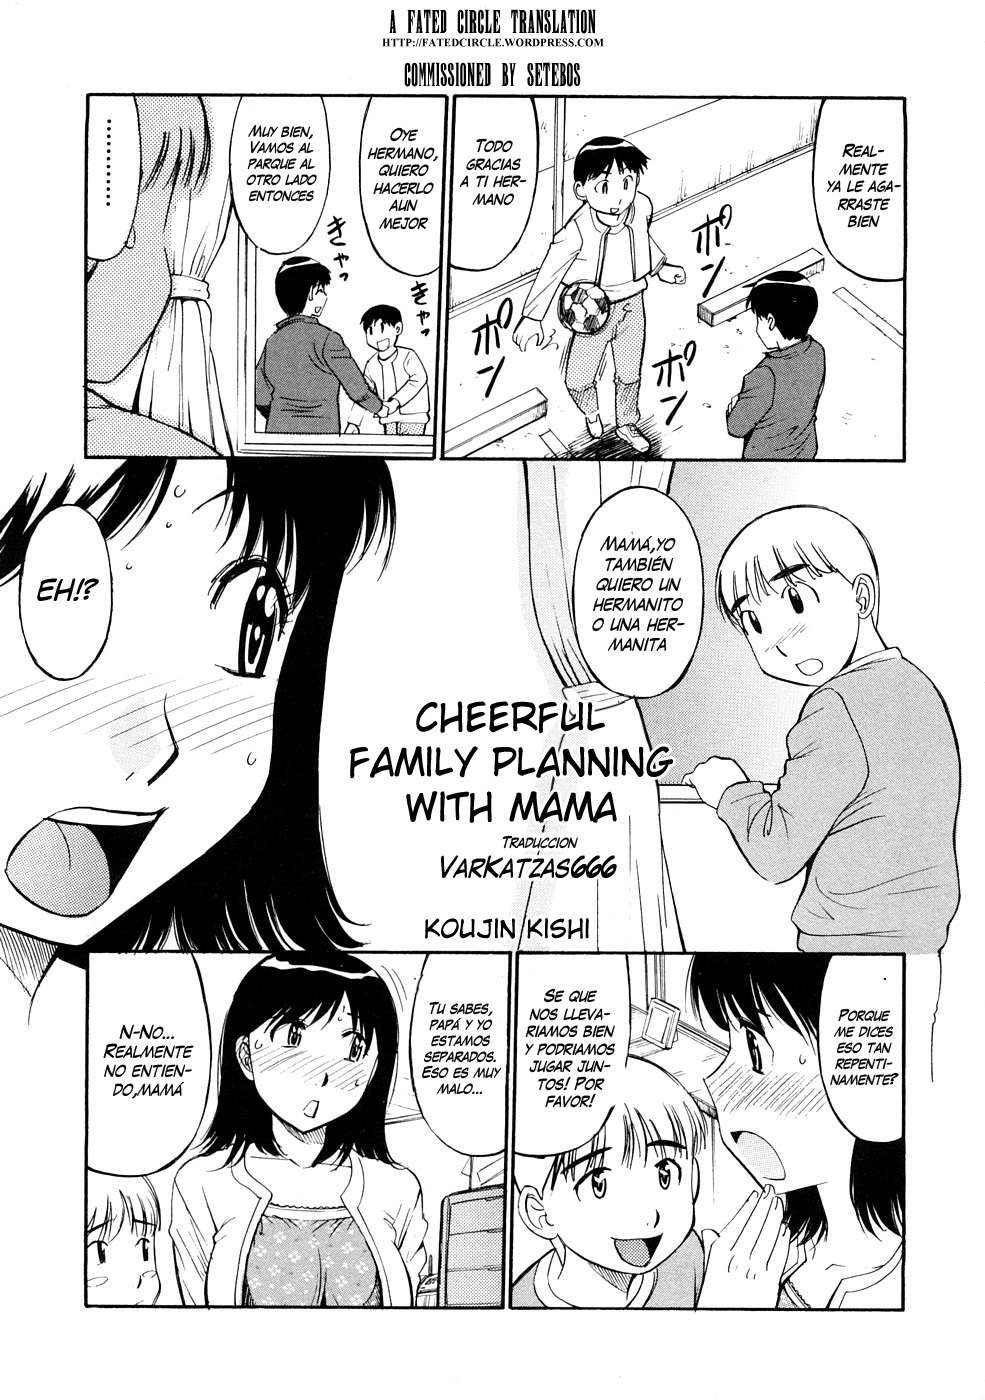 Cheerful Family Planning with Mama (Sin Censura) Chapter-1 - 0